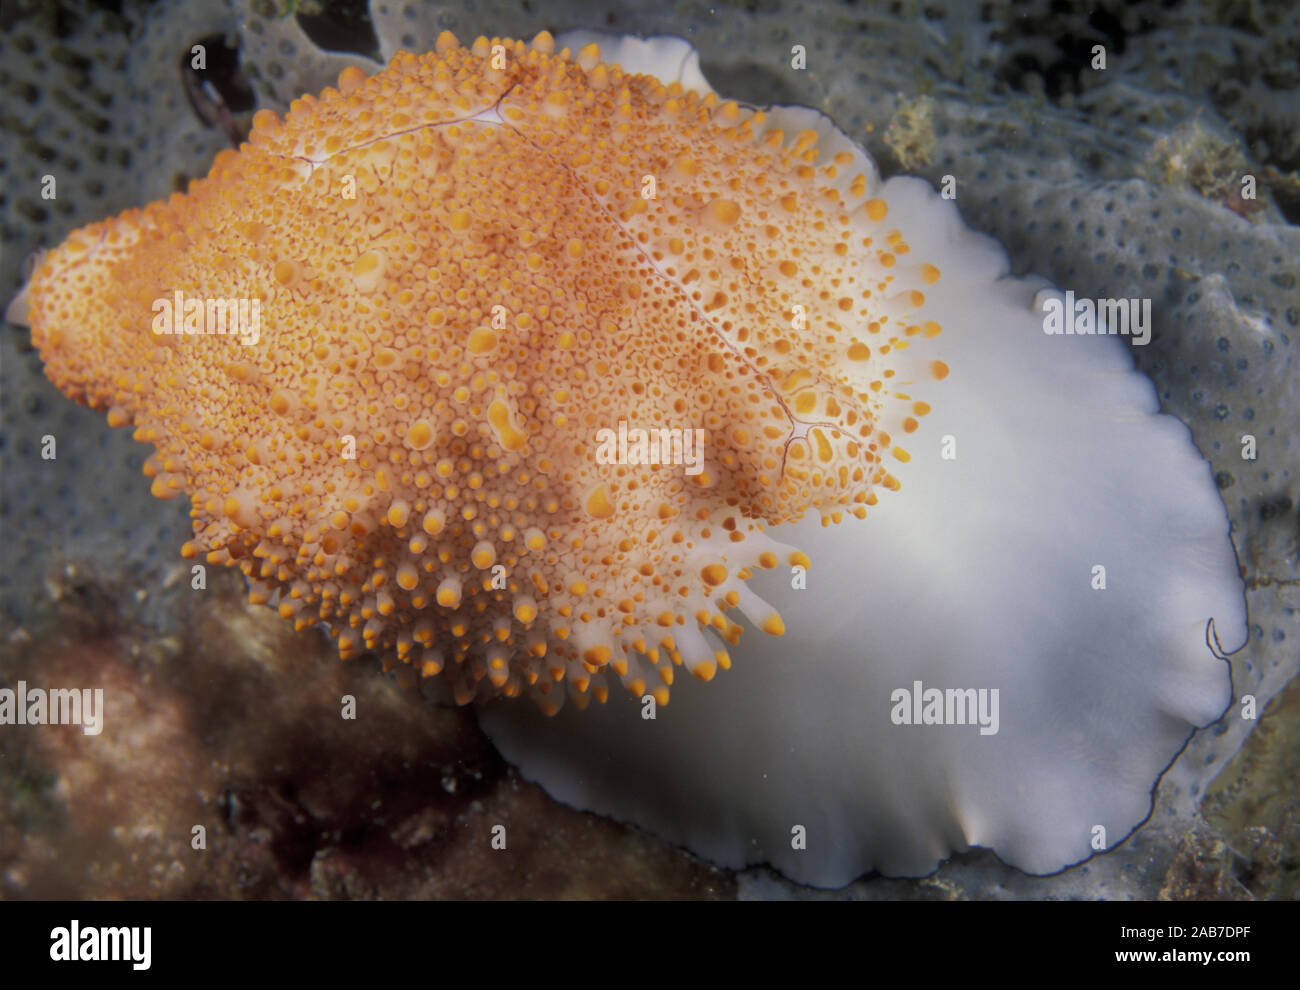 Costellate egg cowrie (Ovula costellata), an allied cowrie or ‘Egg shell’, related to cowries with thick white shell like Egg cowry (Ovula ovum). Soli Stock Photo